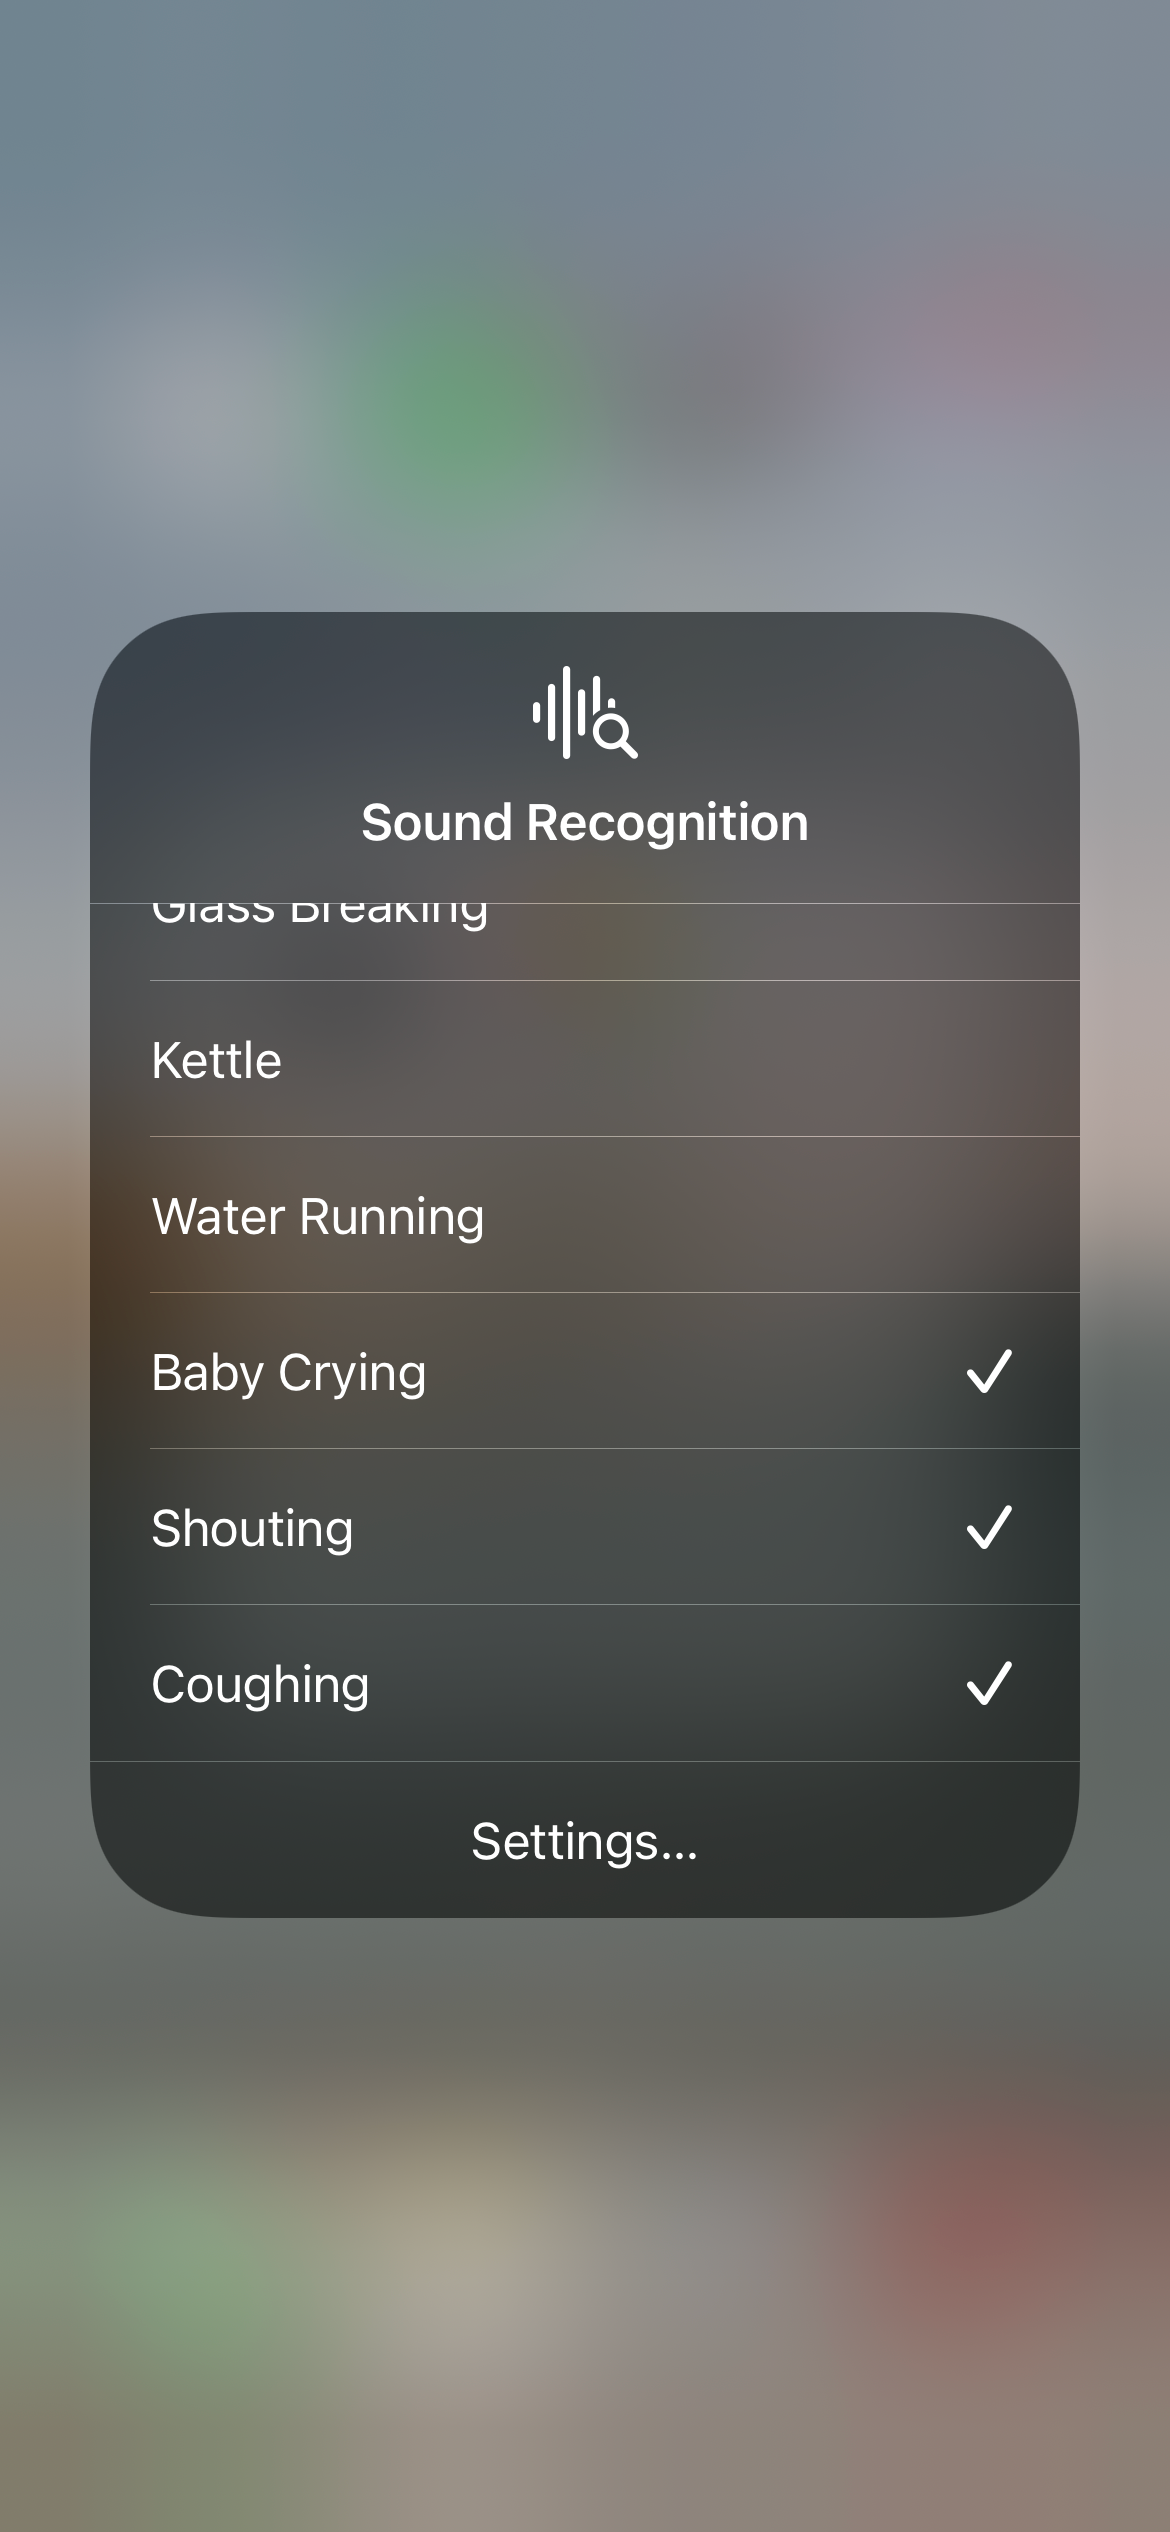 Sound Recognition Options